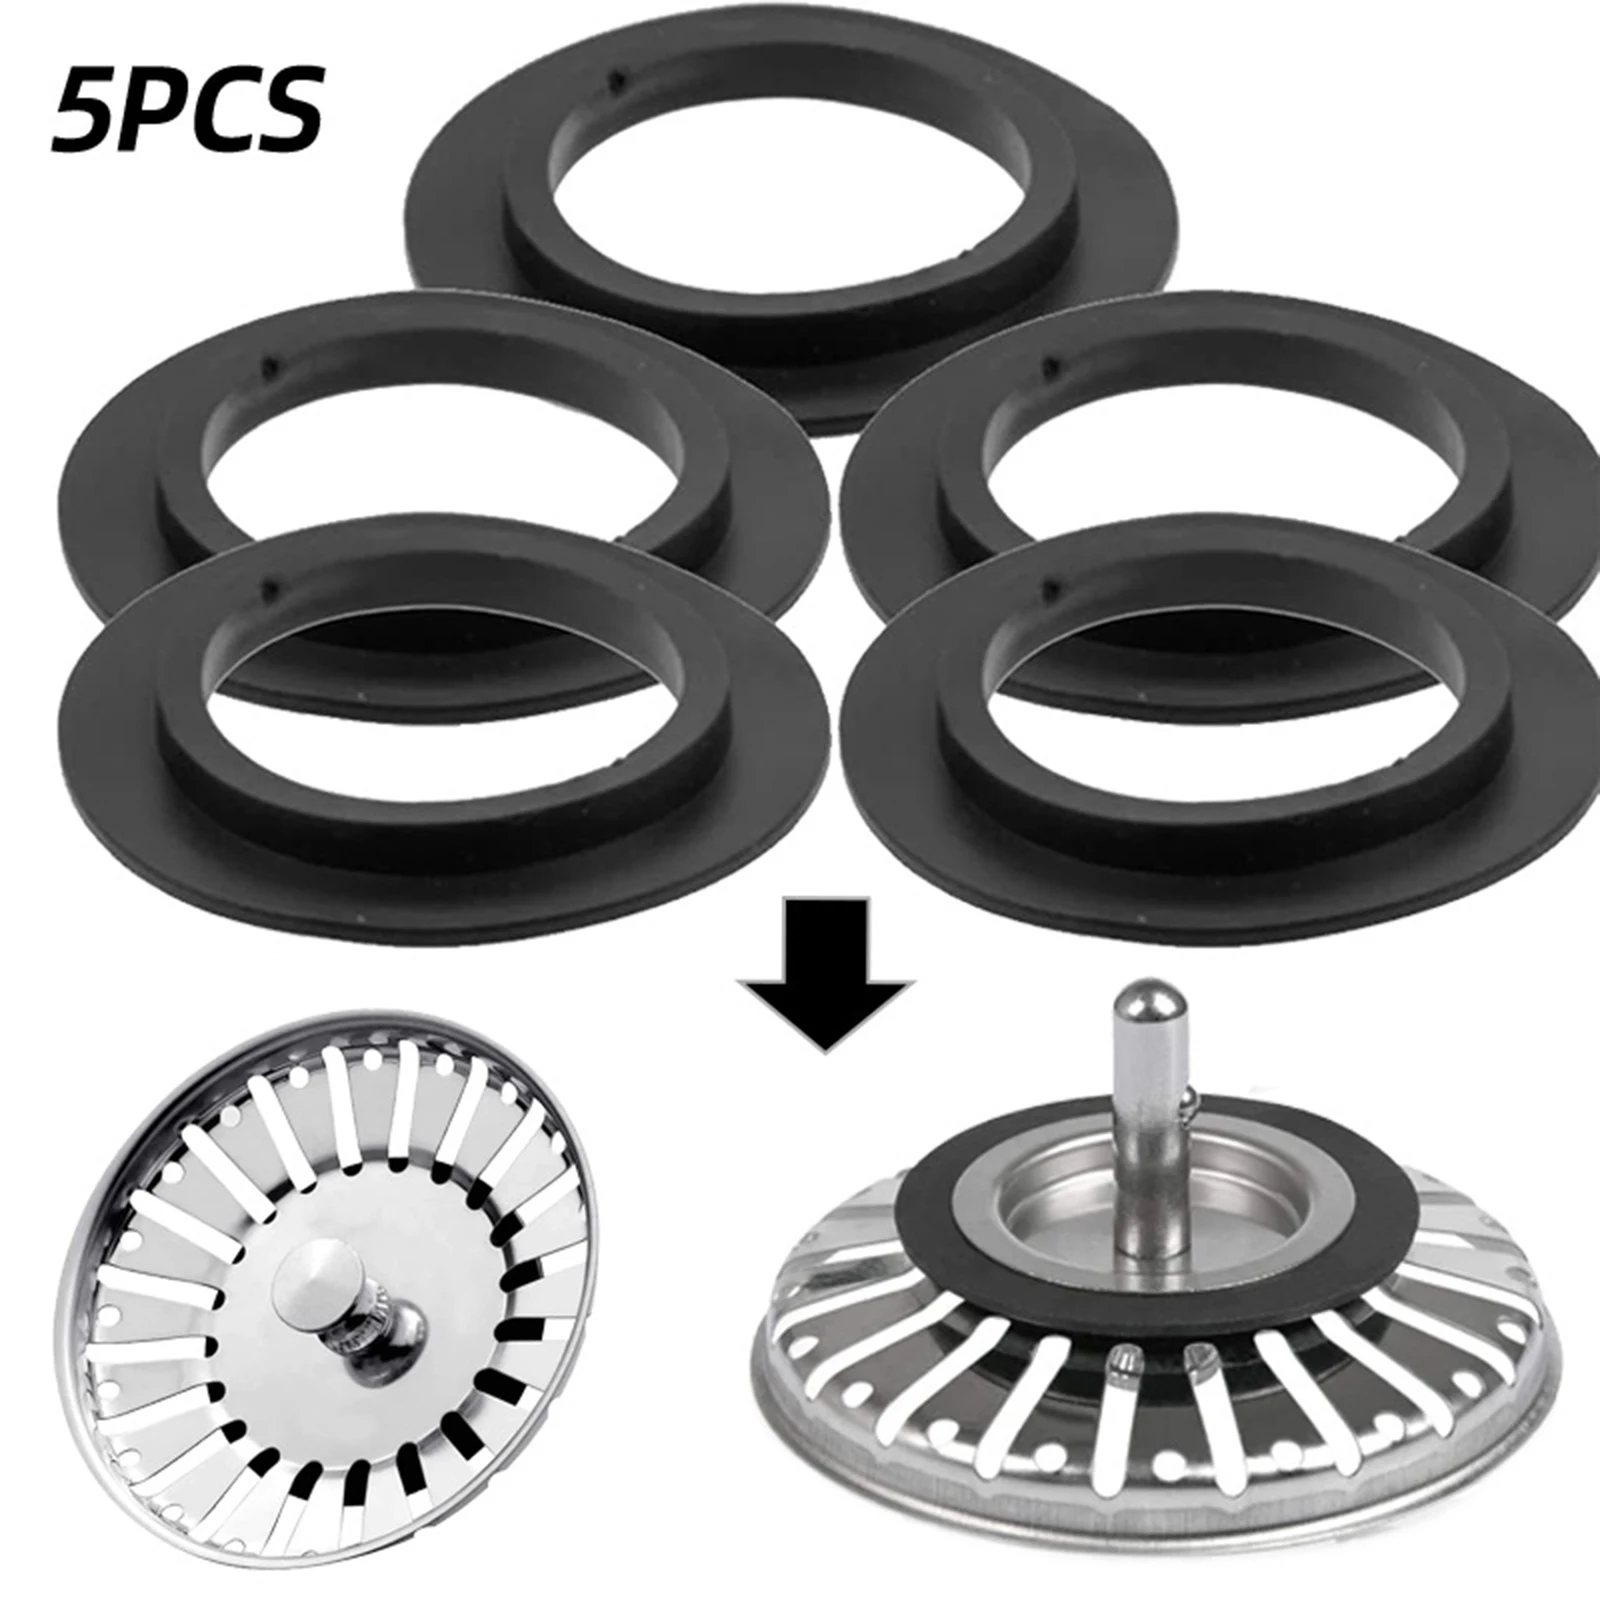 5Pcs Rubber Waterproof Gasket Strainer Seals Durable O-ring Washer Gaskets Kitchen Sink Filter Replacement Accessories 5pcs black rubber gasket water blocking gasket filter gasket kitchen sink sealing filter durable practical sink drain